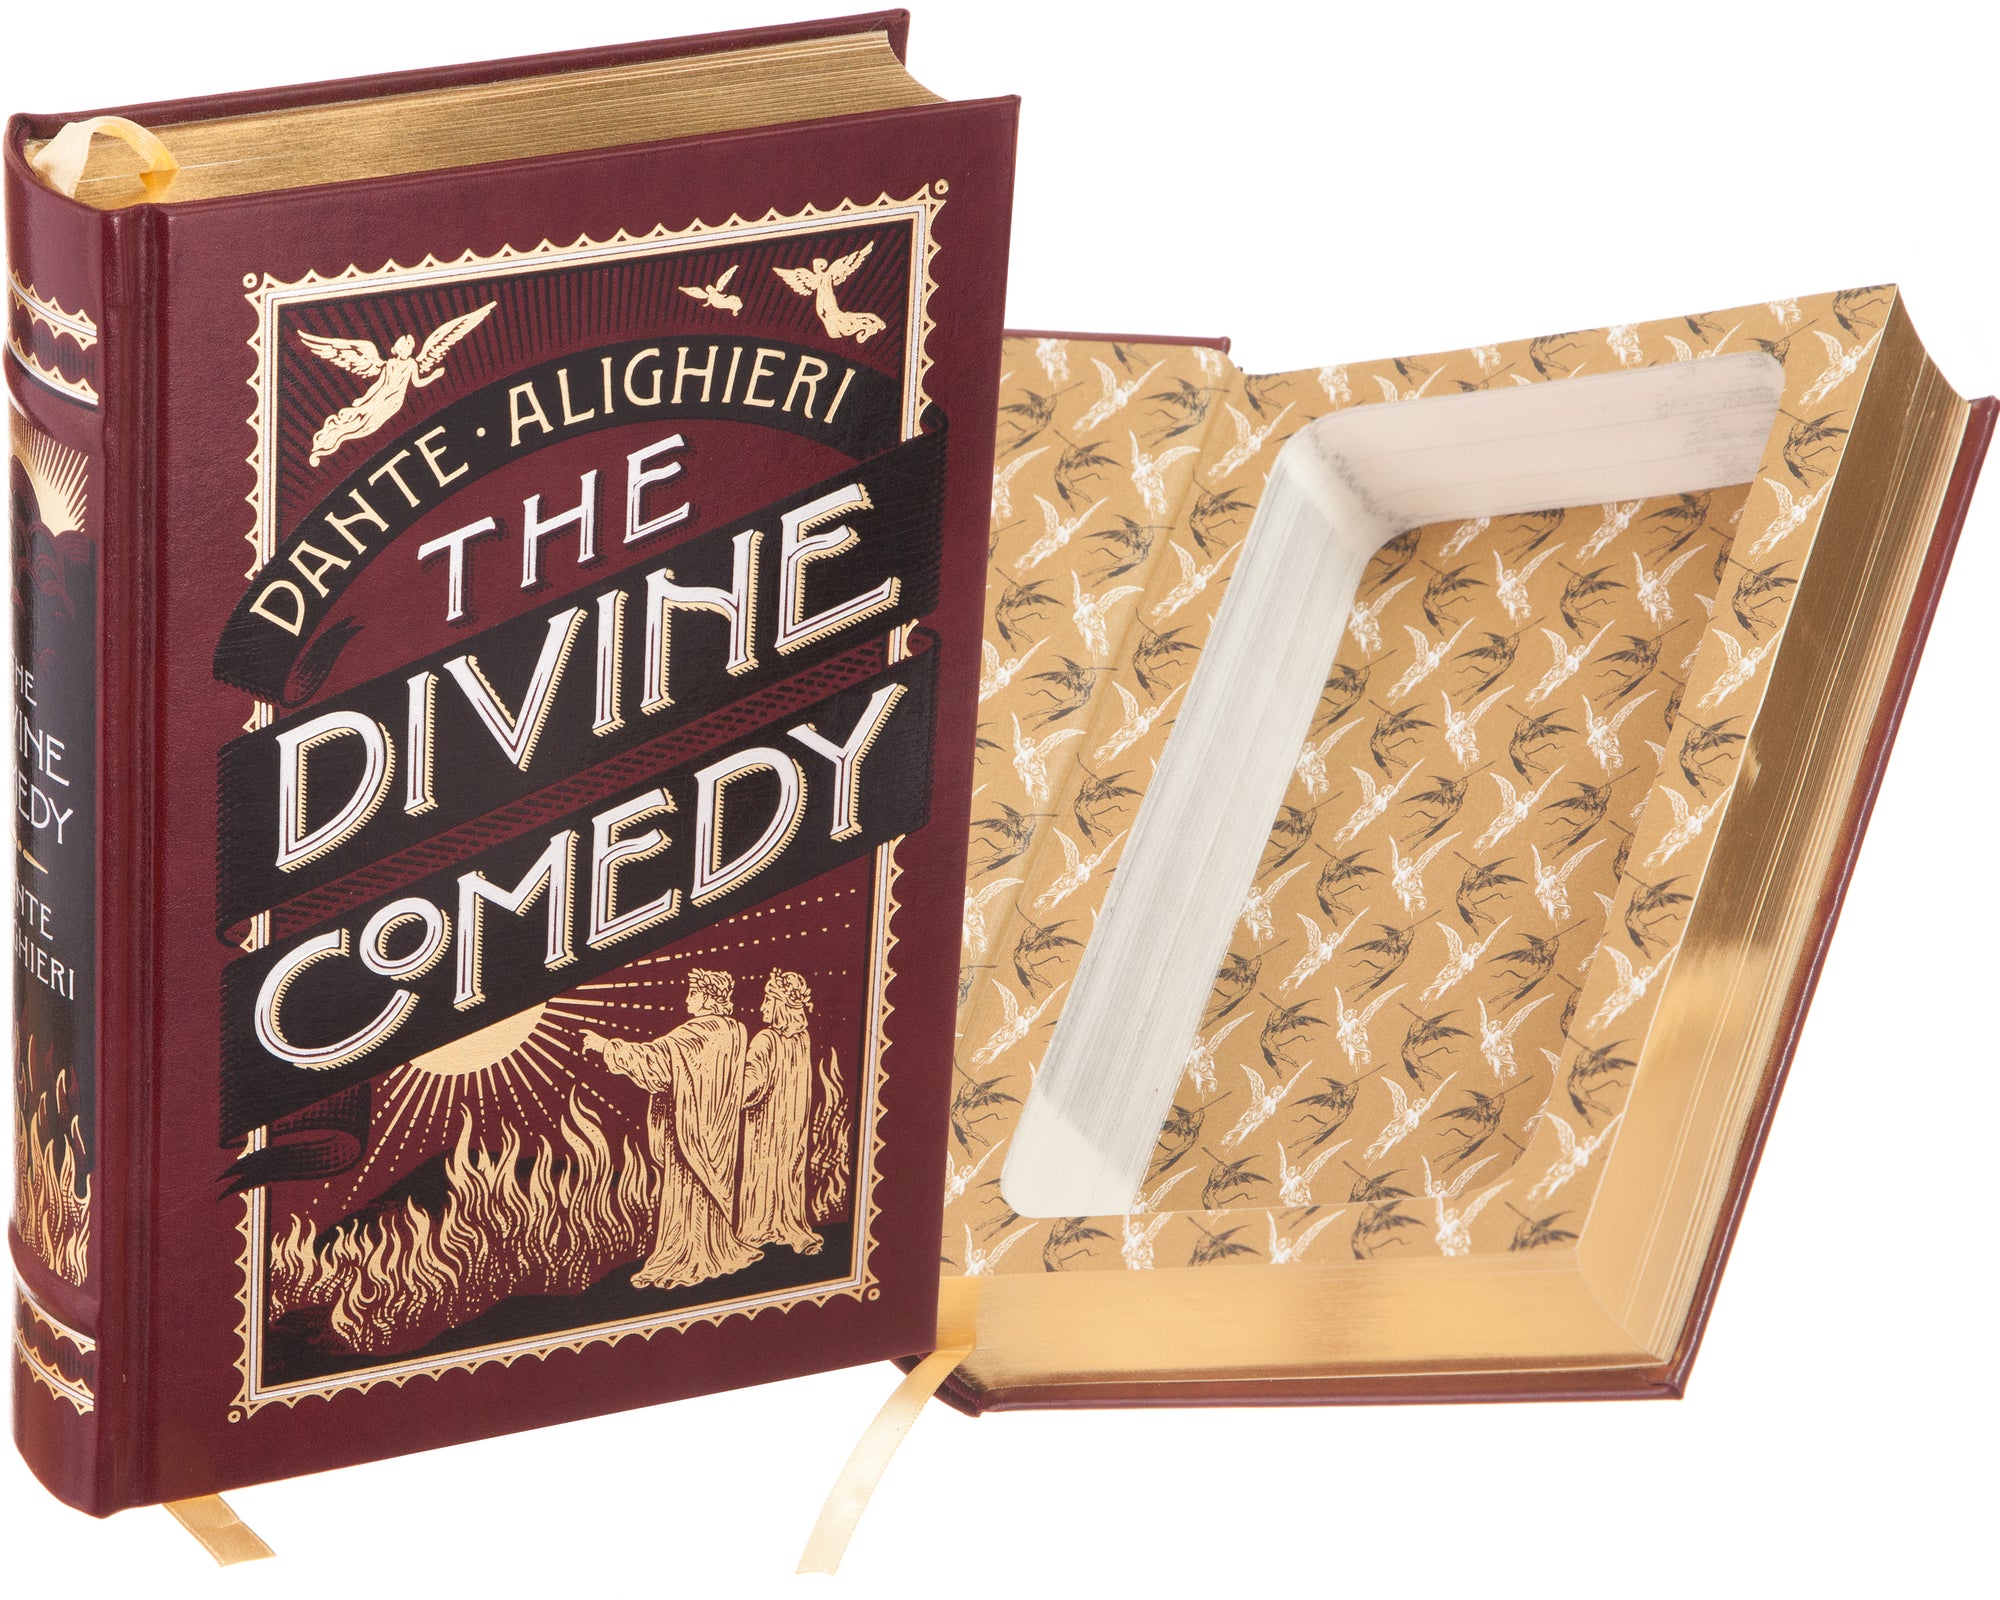 Divine　Book　The　Safe:　(Leather-bound)　BookRooks　by　Comedy　Hollow　Dante